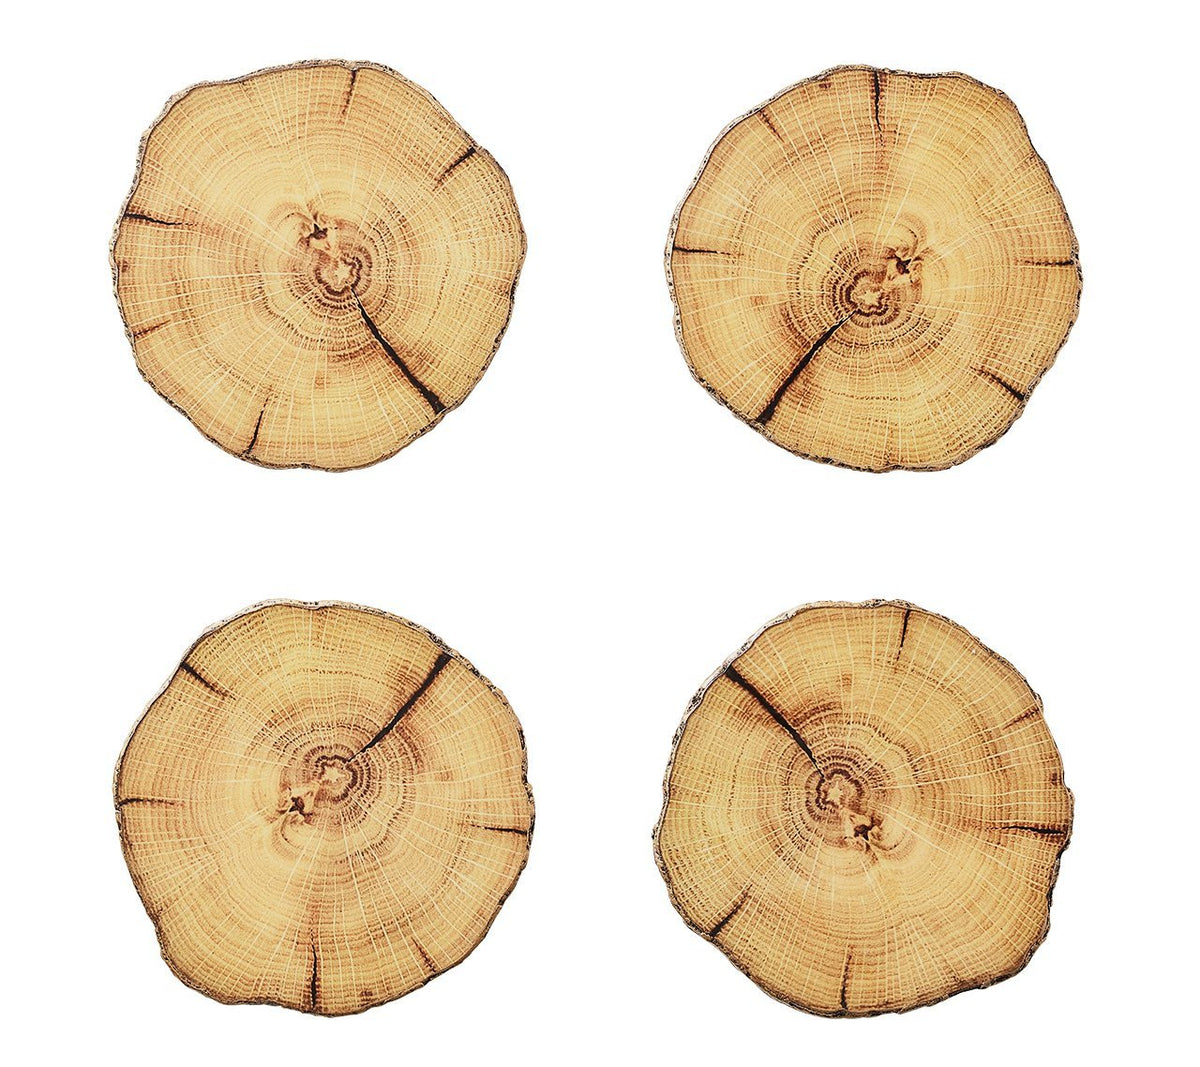 Woodland Drink Coasters in Natural & Brown, Set of 4 in a Gift Box by Kim Seybert